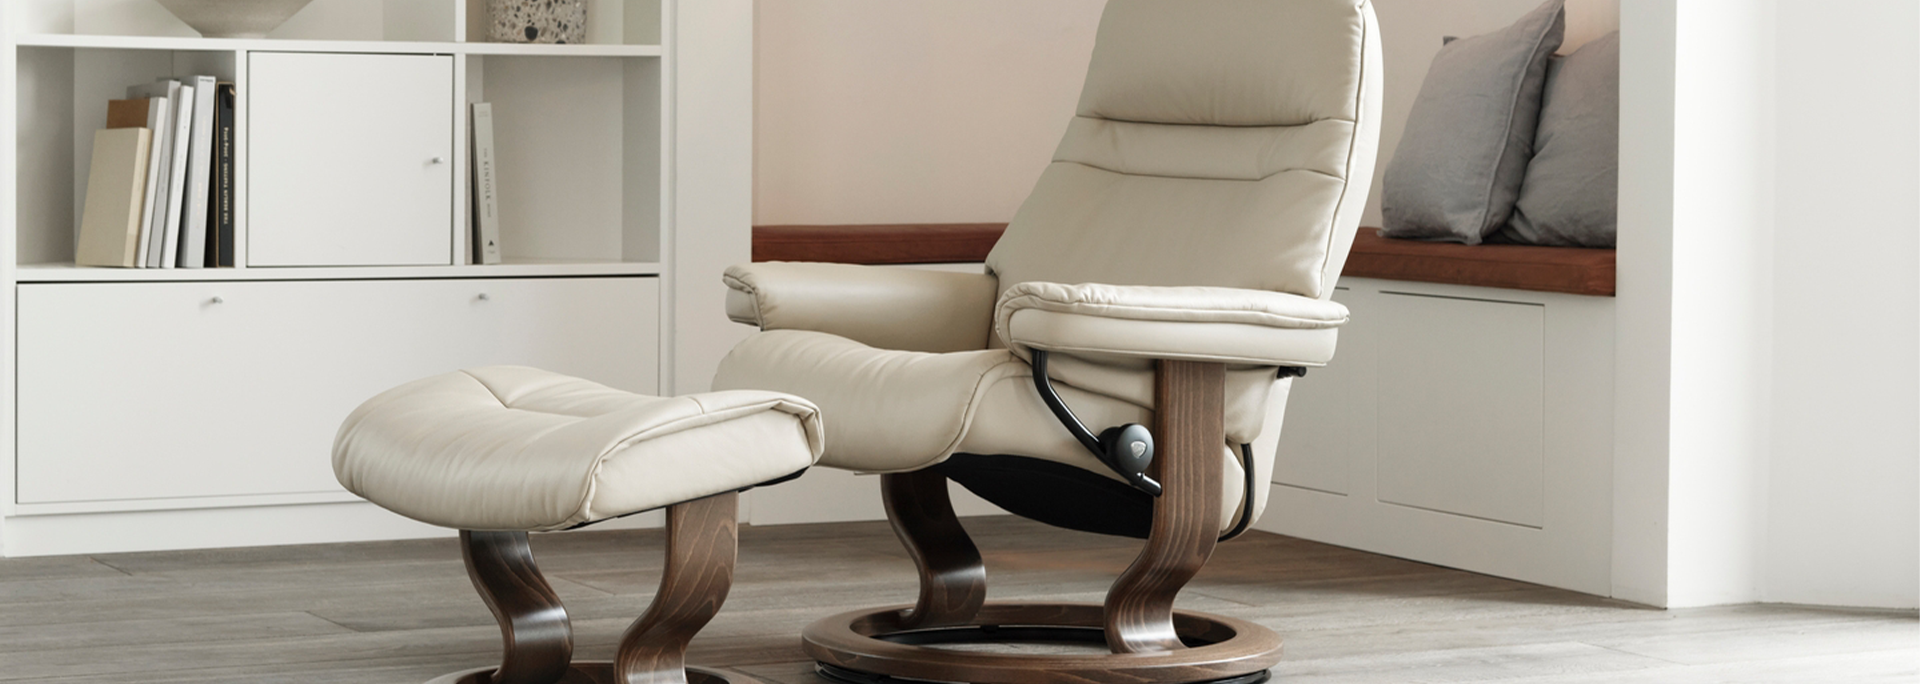 Stressless Classic Base Recliners – SL Recliners